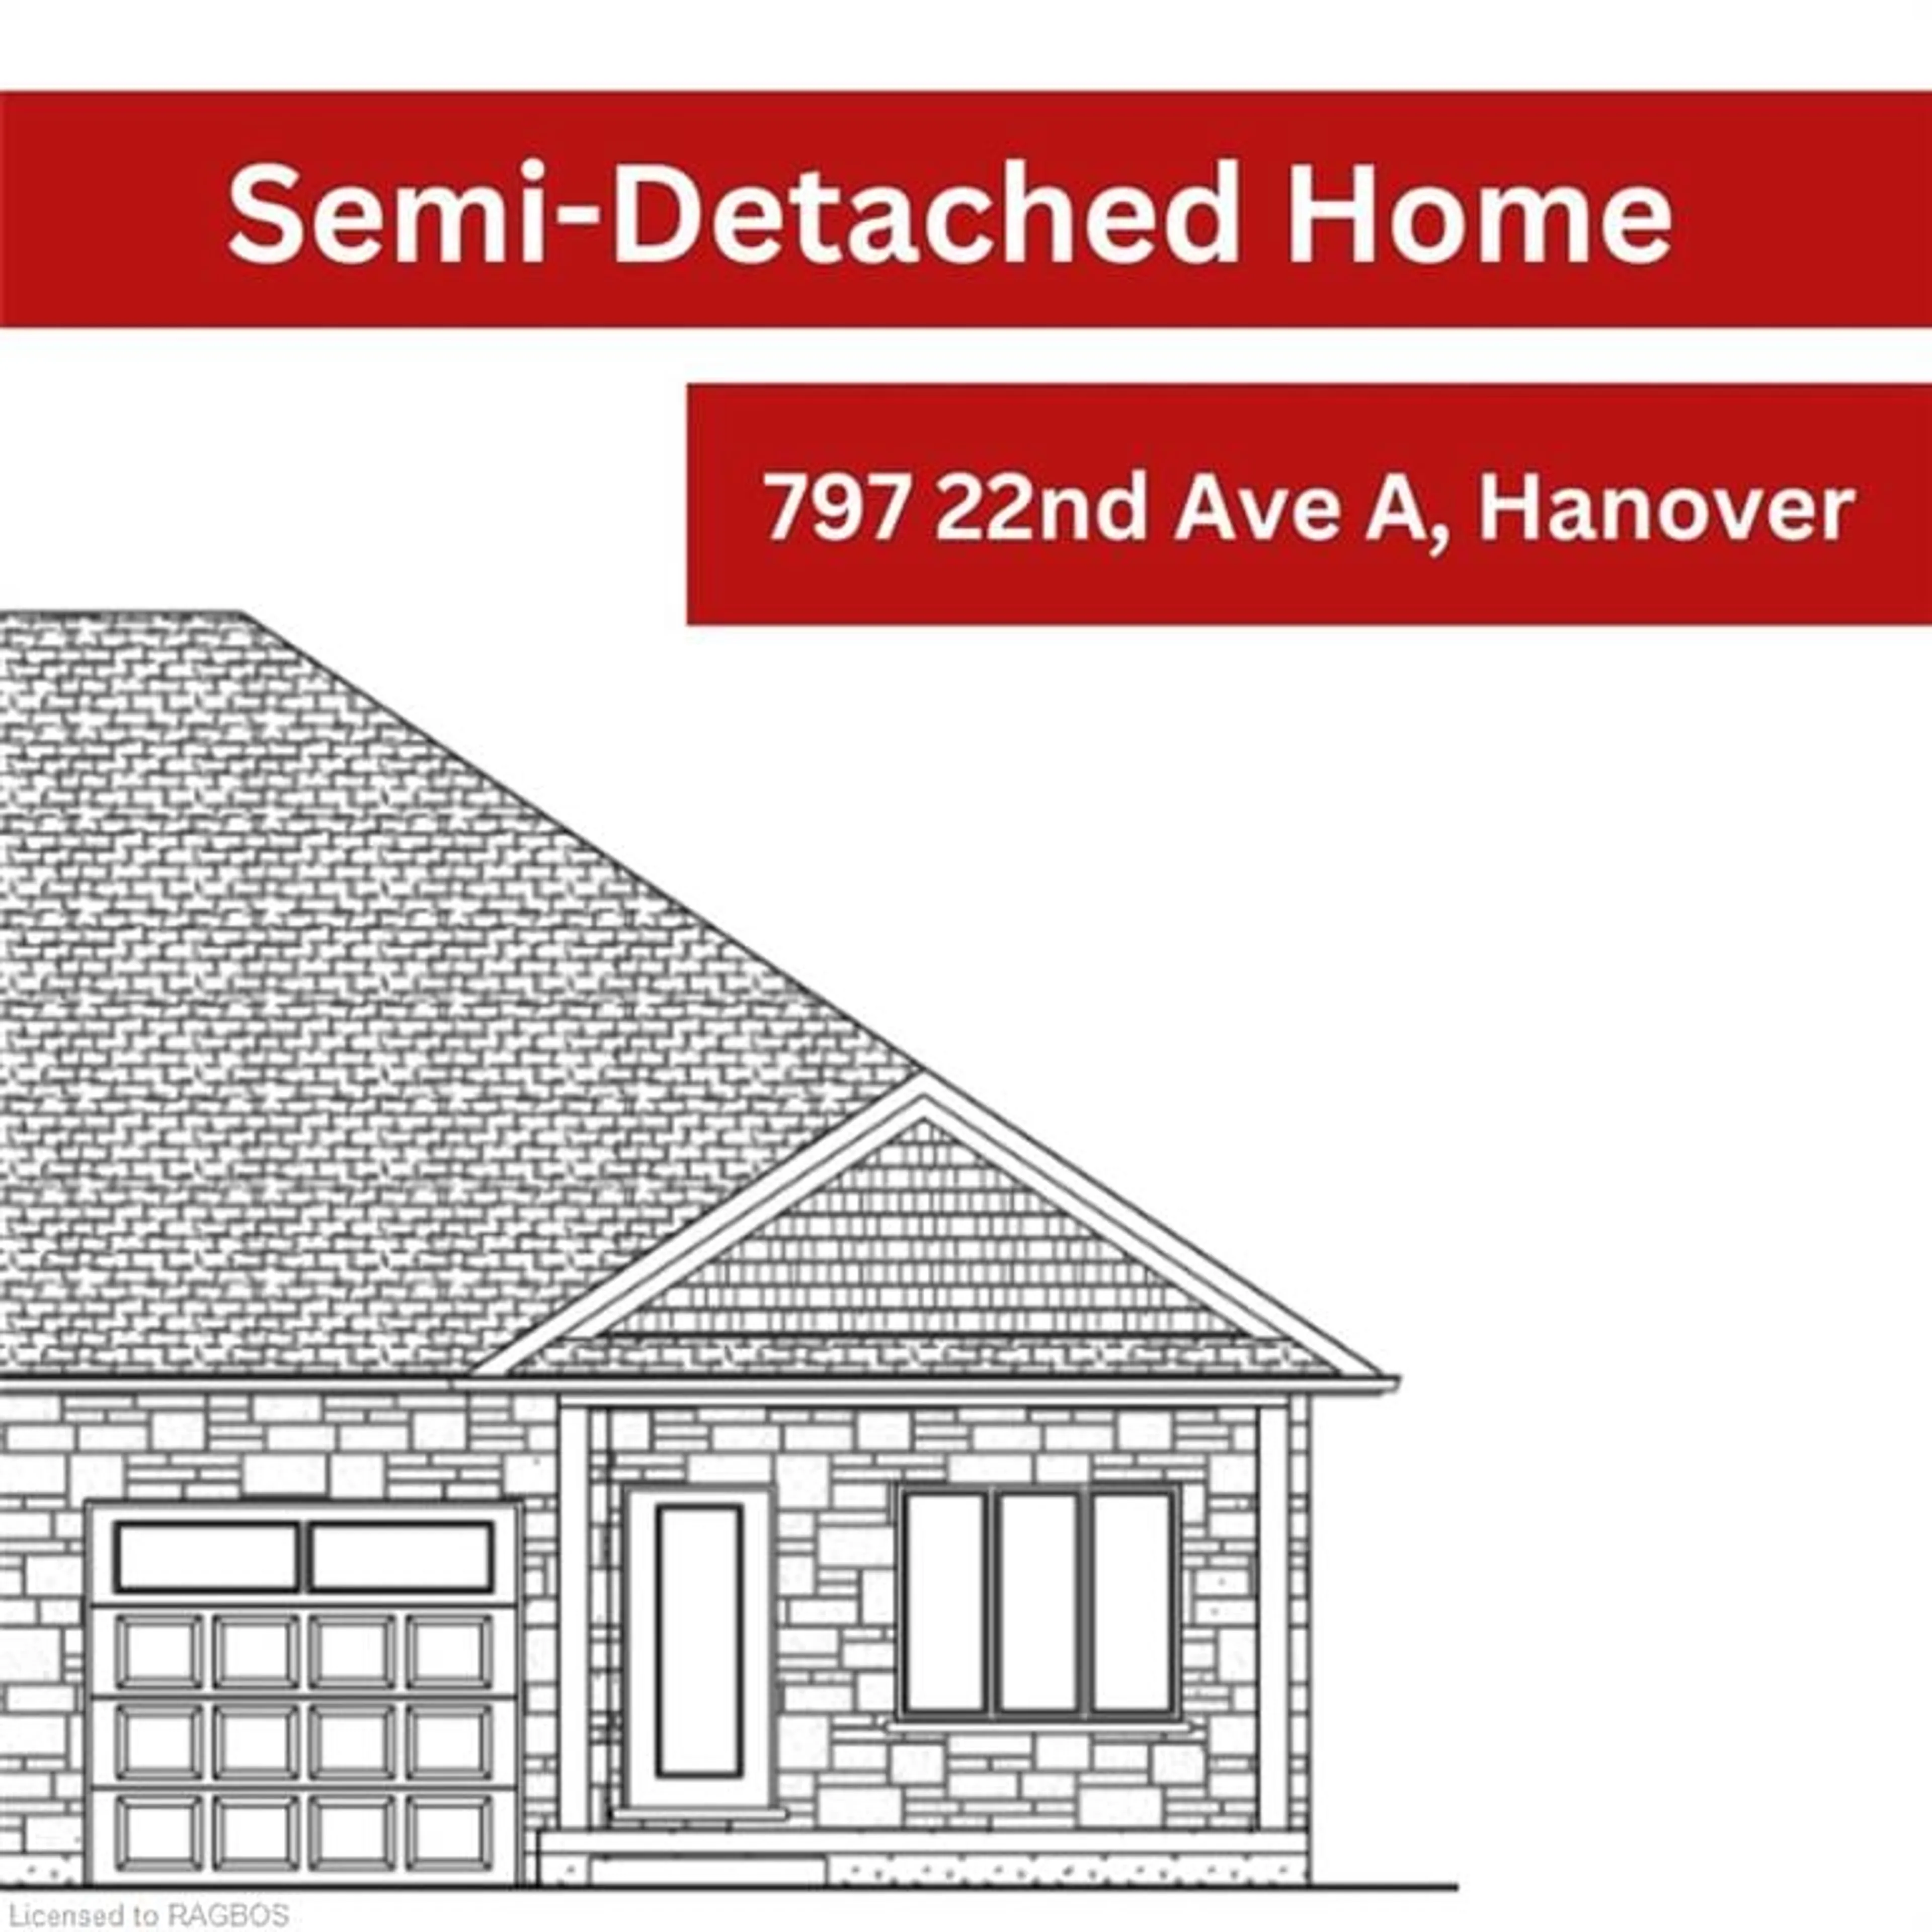 Home with vinyl exterior material for 797 22nd Avenue A, Hanover Ontario N4N 3B8